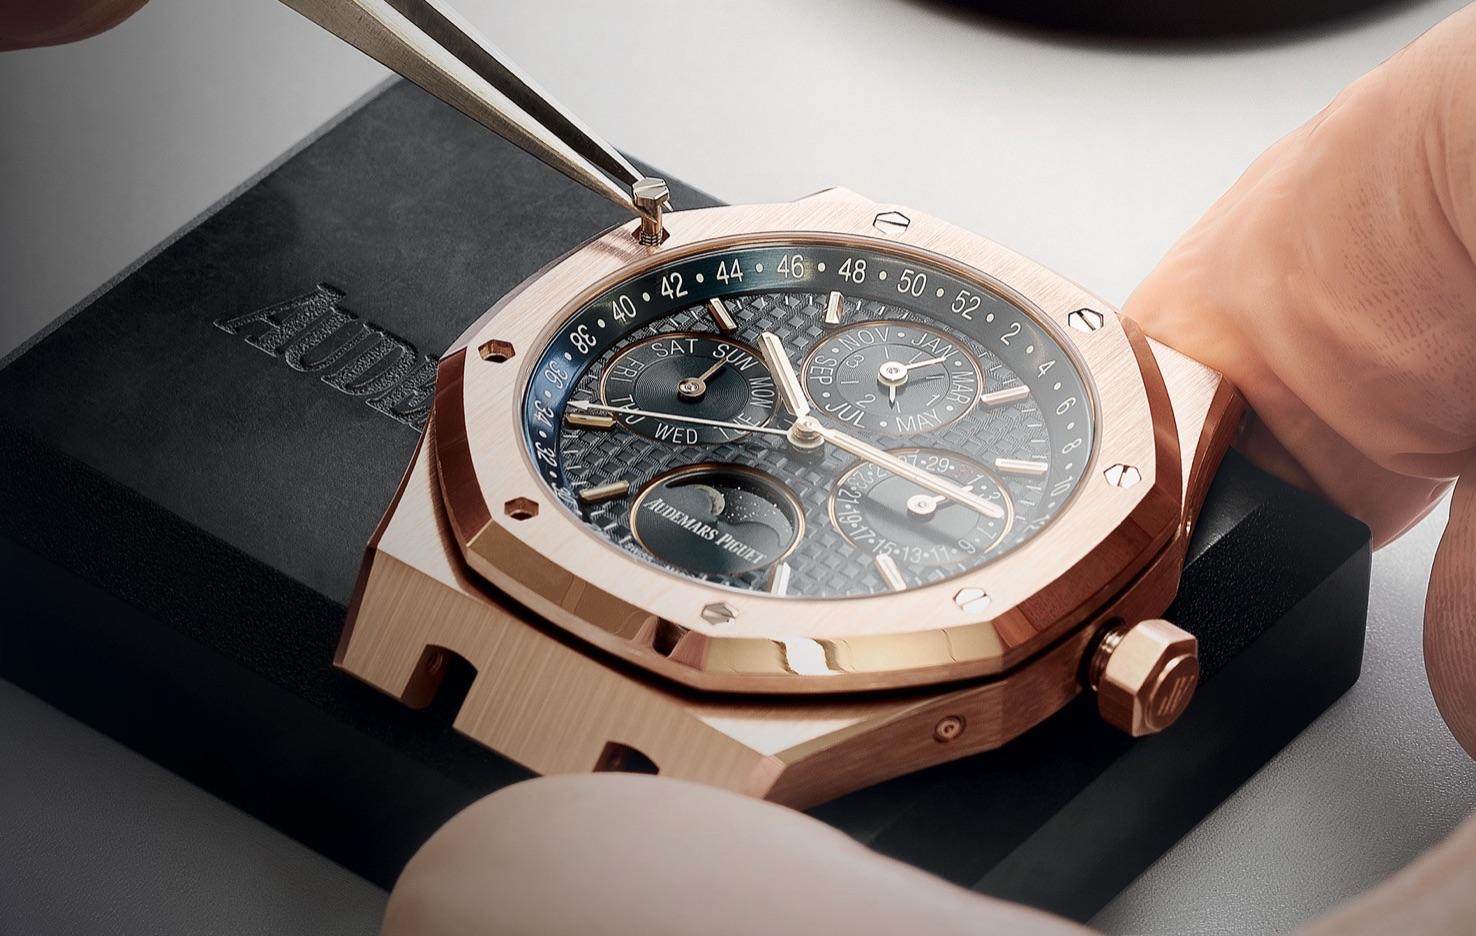 How To Pronounce Watch Brands - Piaget, Hublot, And Other Watch